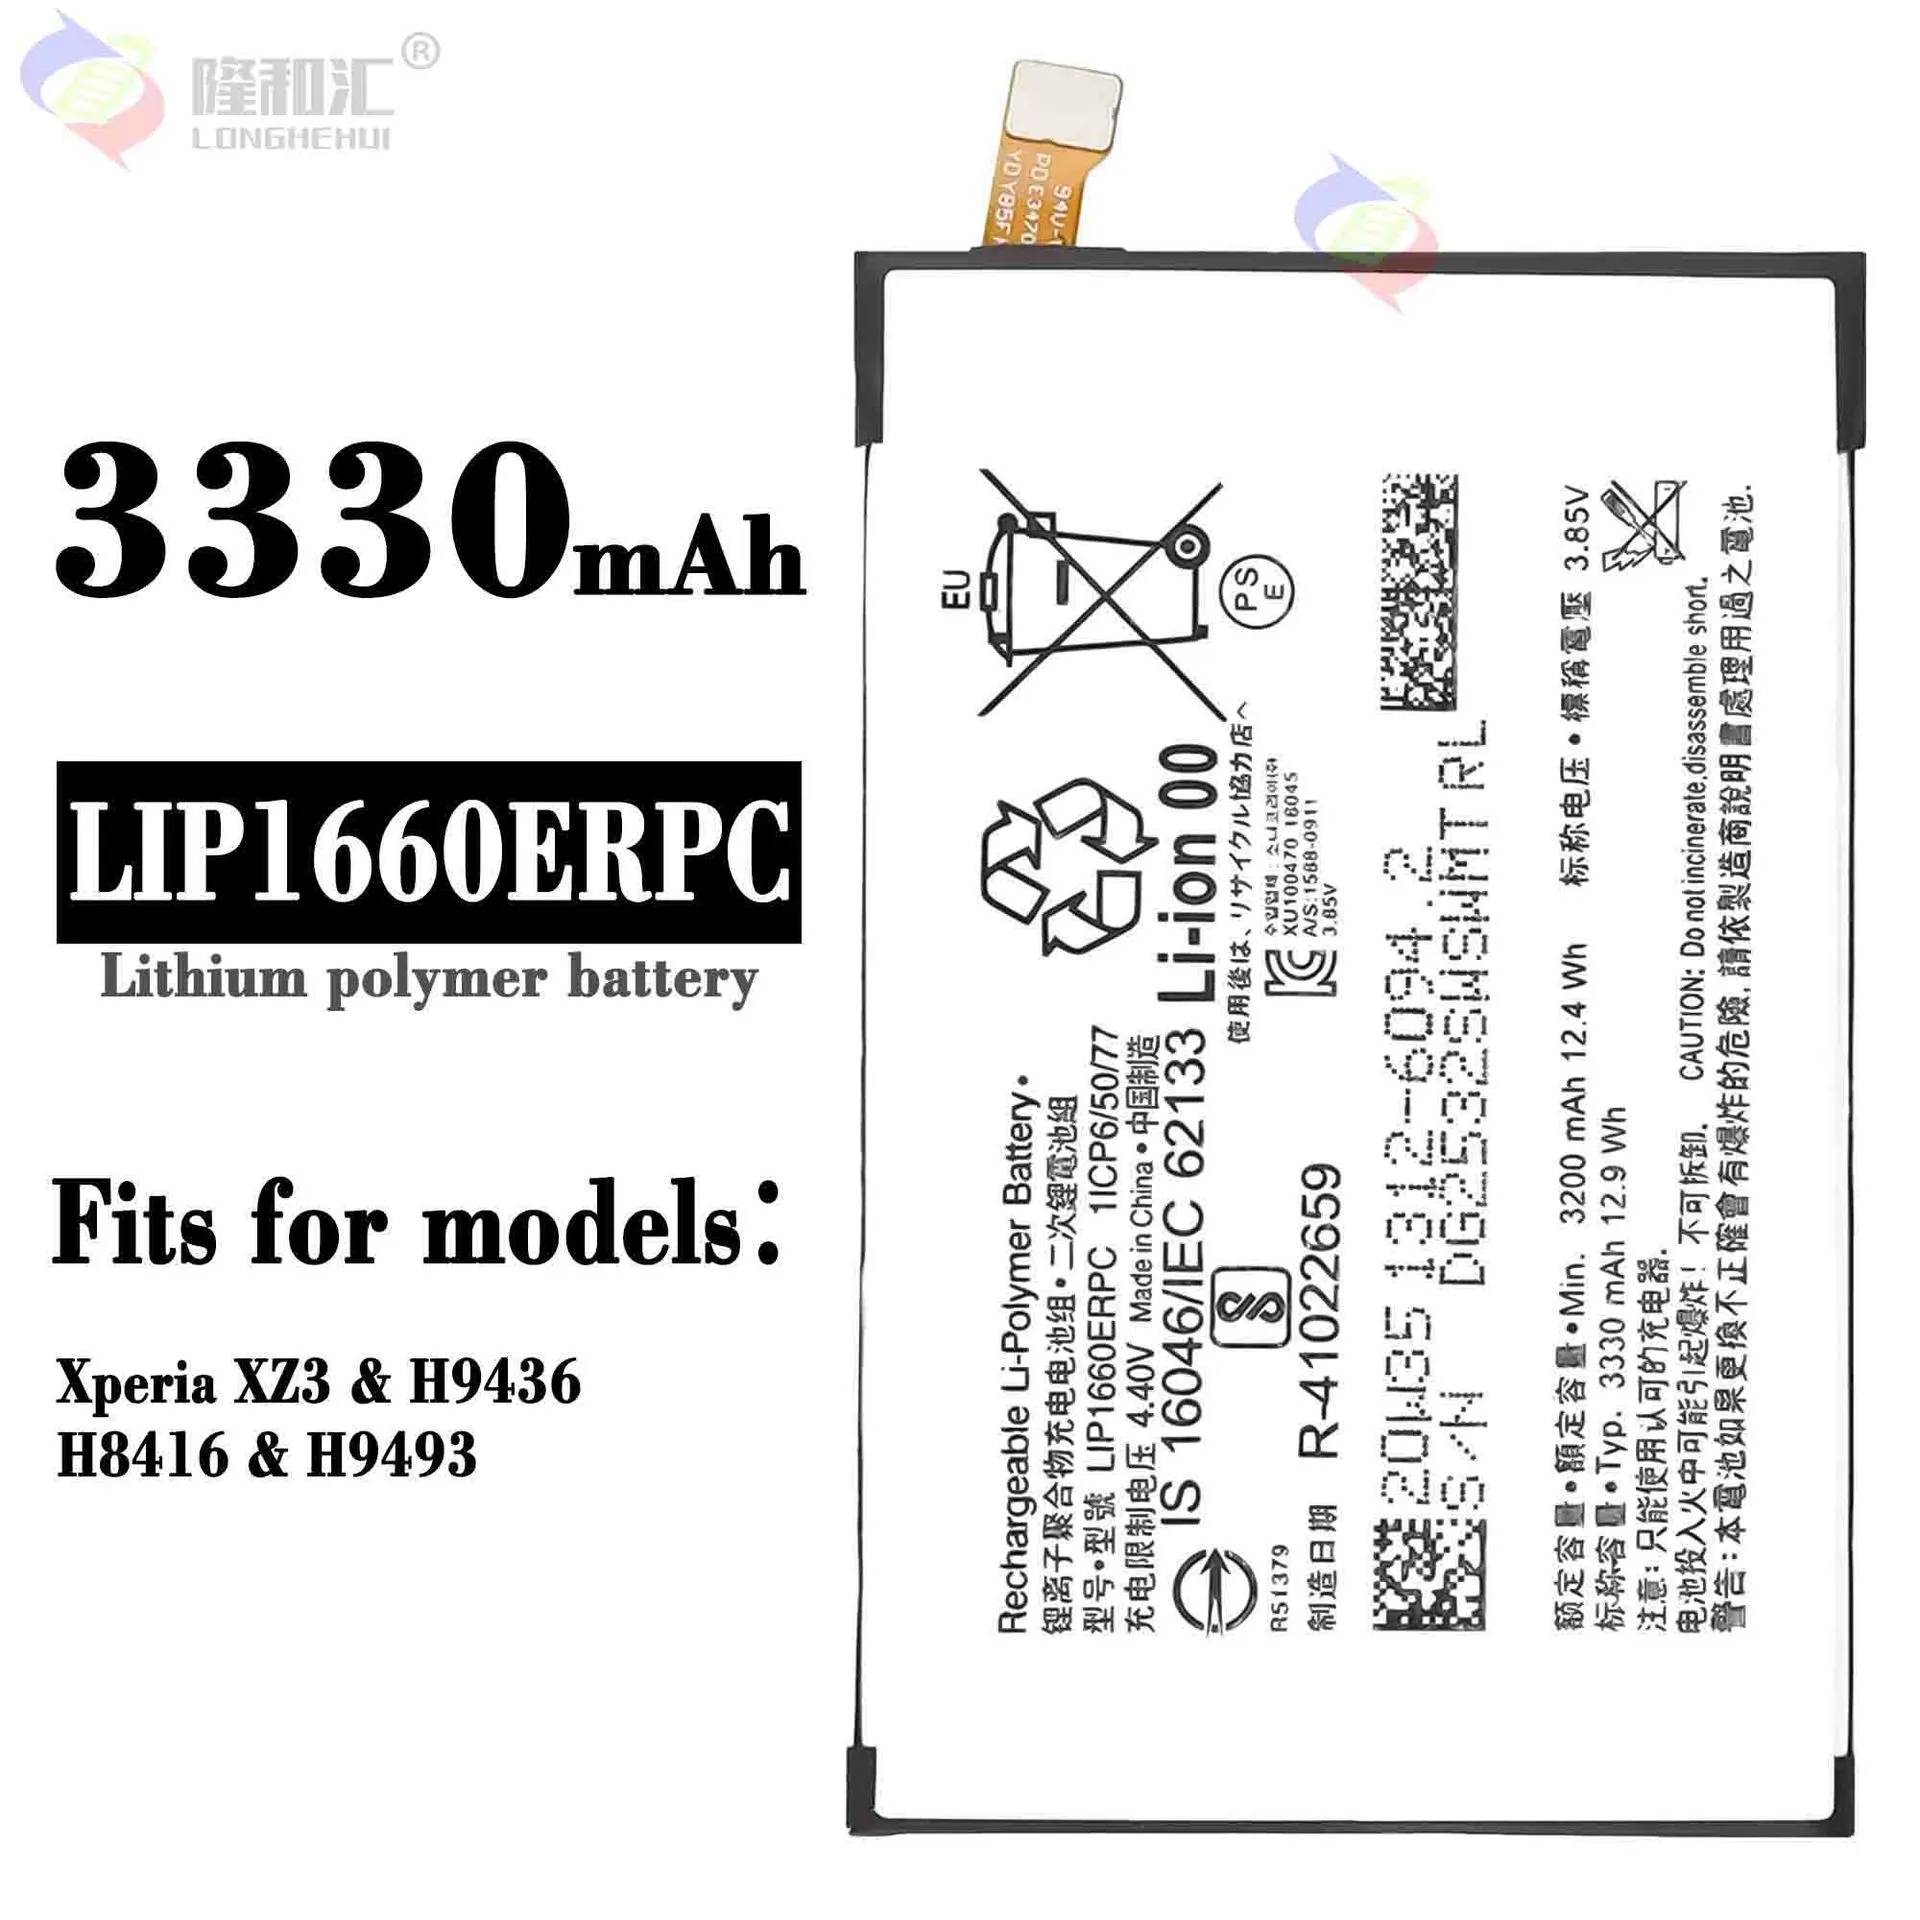 1x 3200mAh LIP1660ERPC Replacement Battery For Sony Xperia XZ3 H9436 H9493 H8416 Batteries enlarge